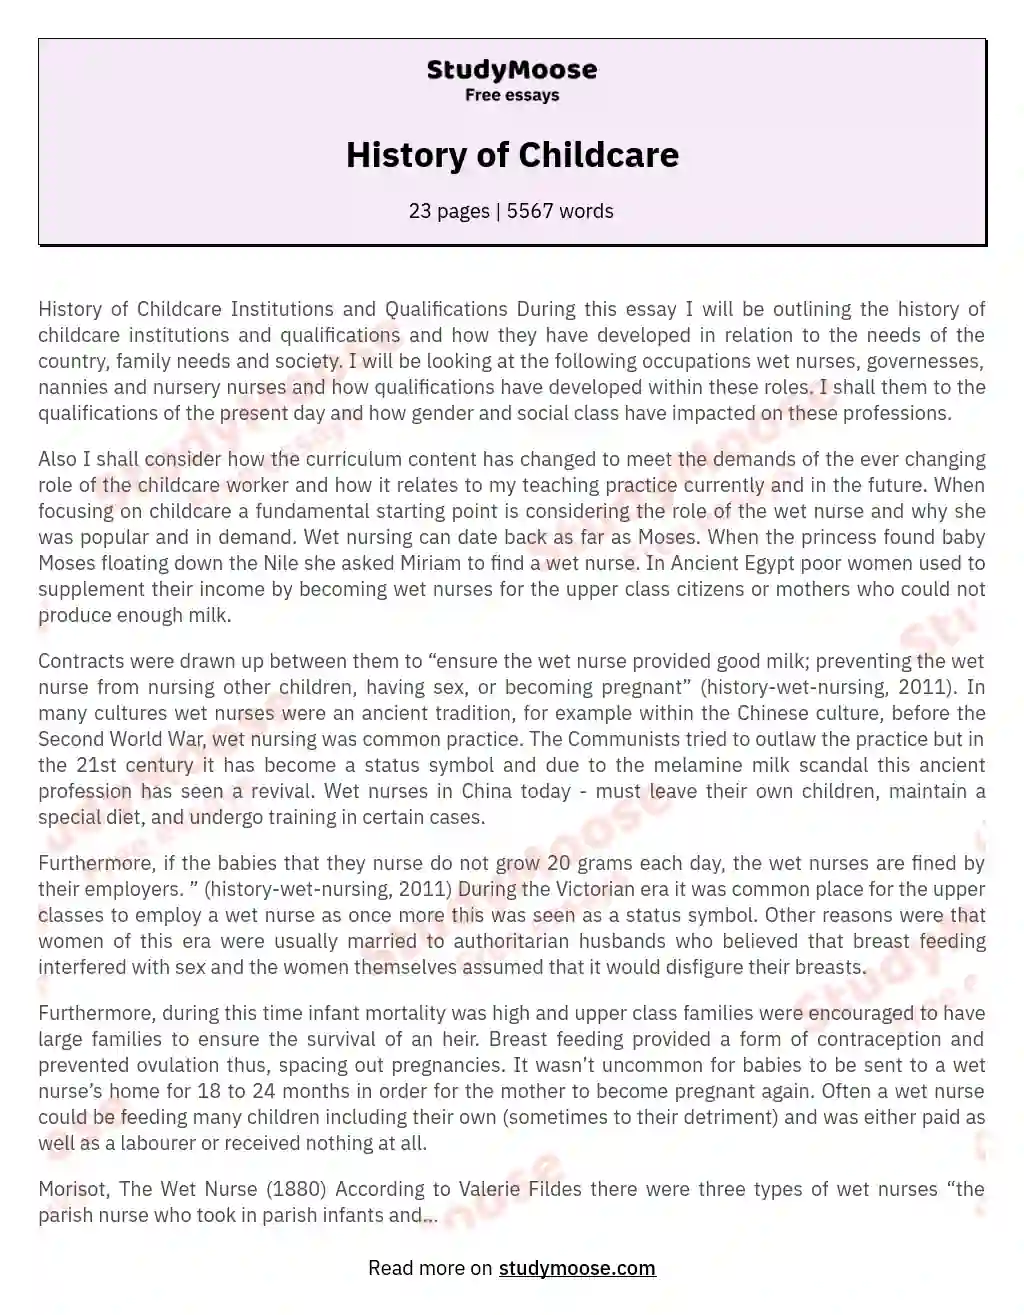 History of Childcare essay